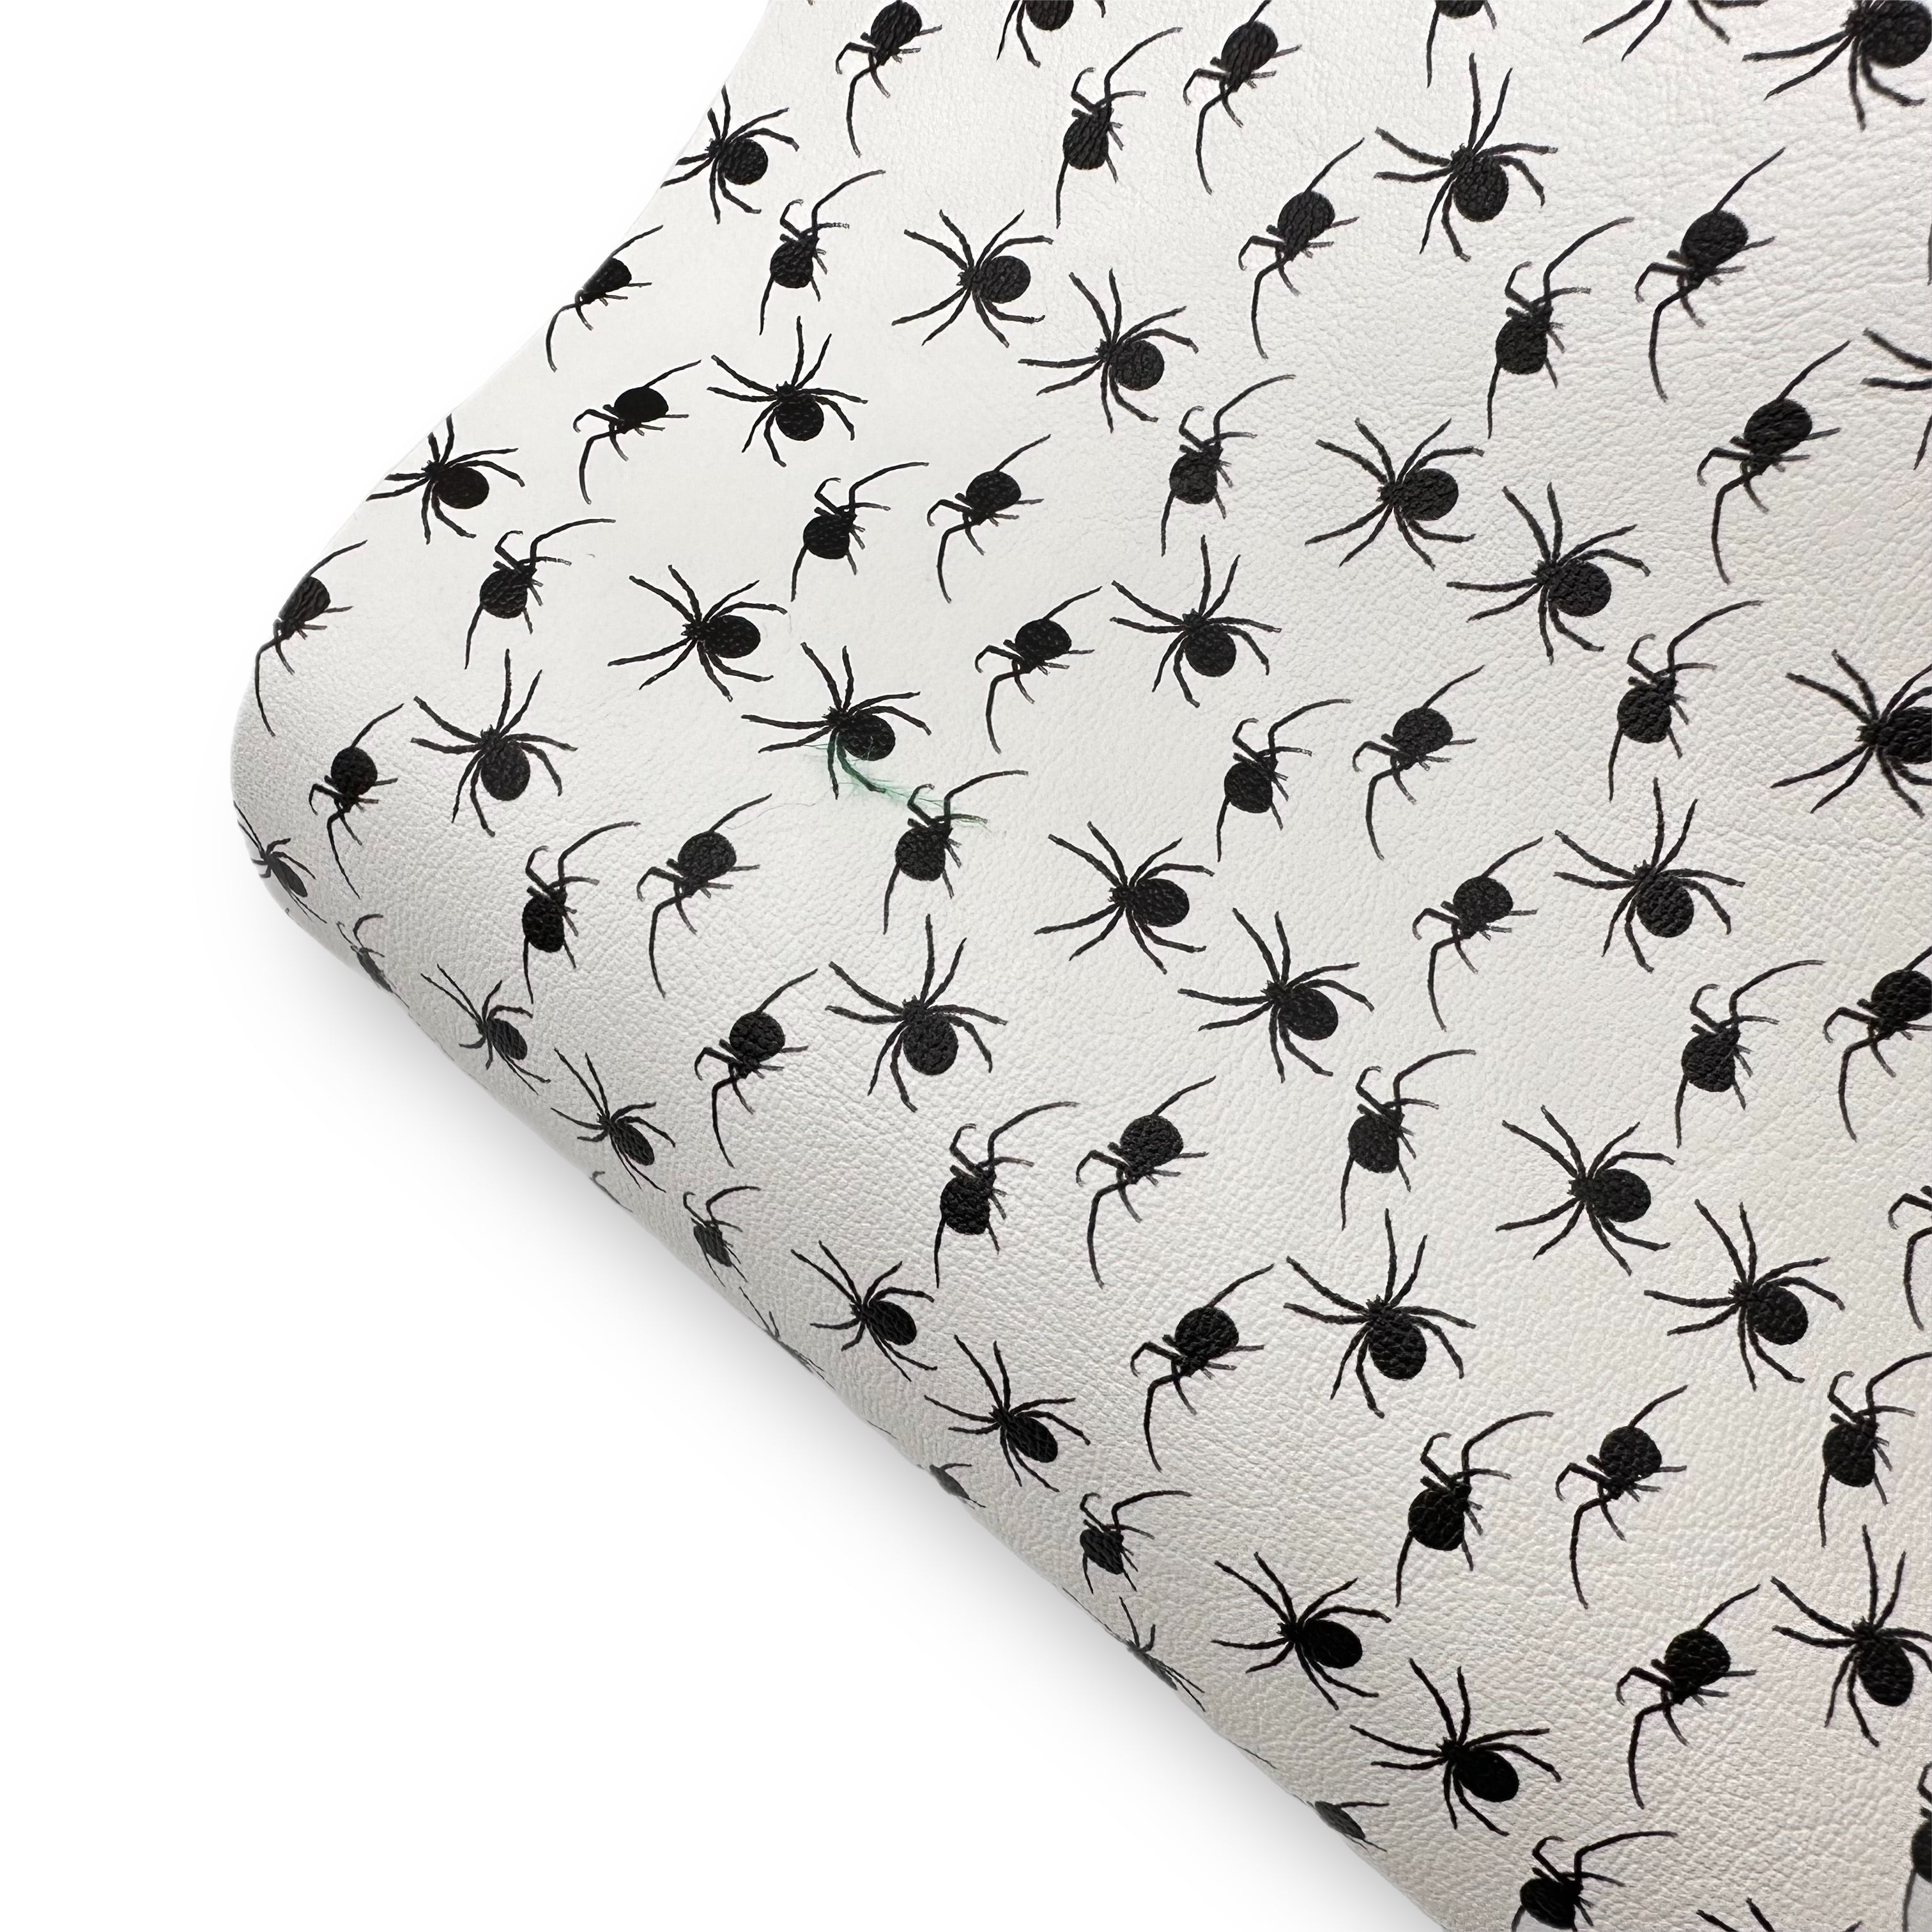 Spider Invasion Premium Faux Leather Fabric Sheets